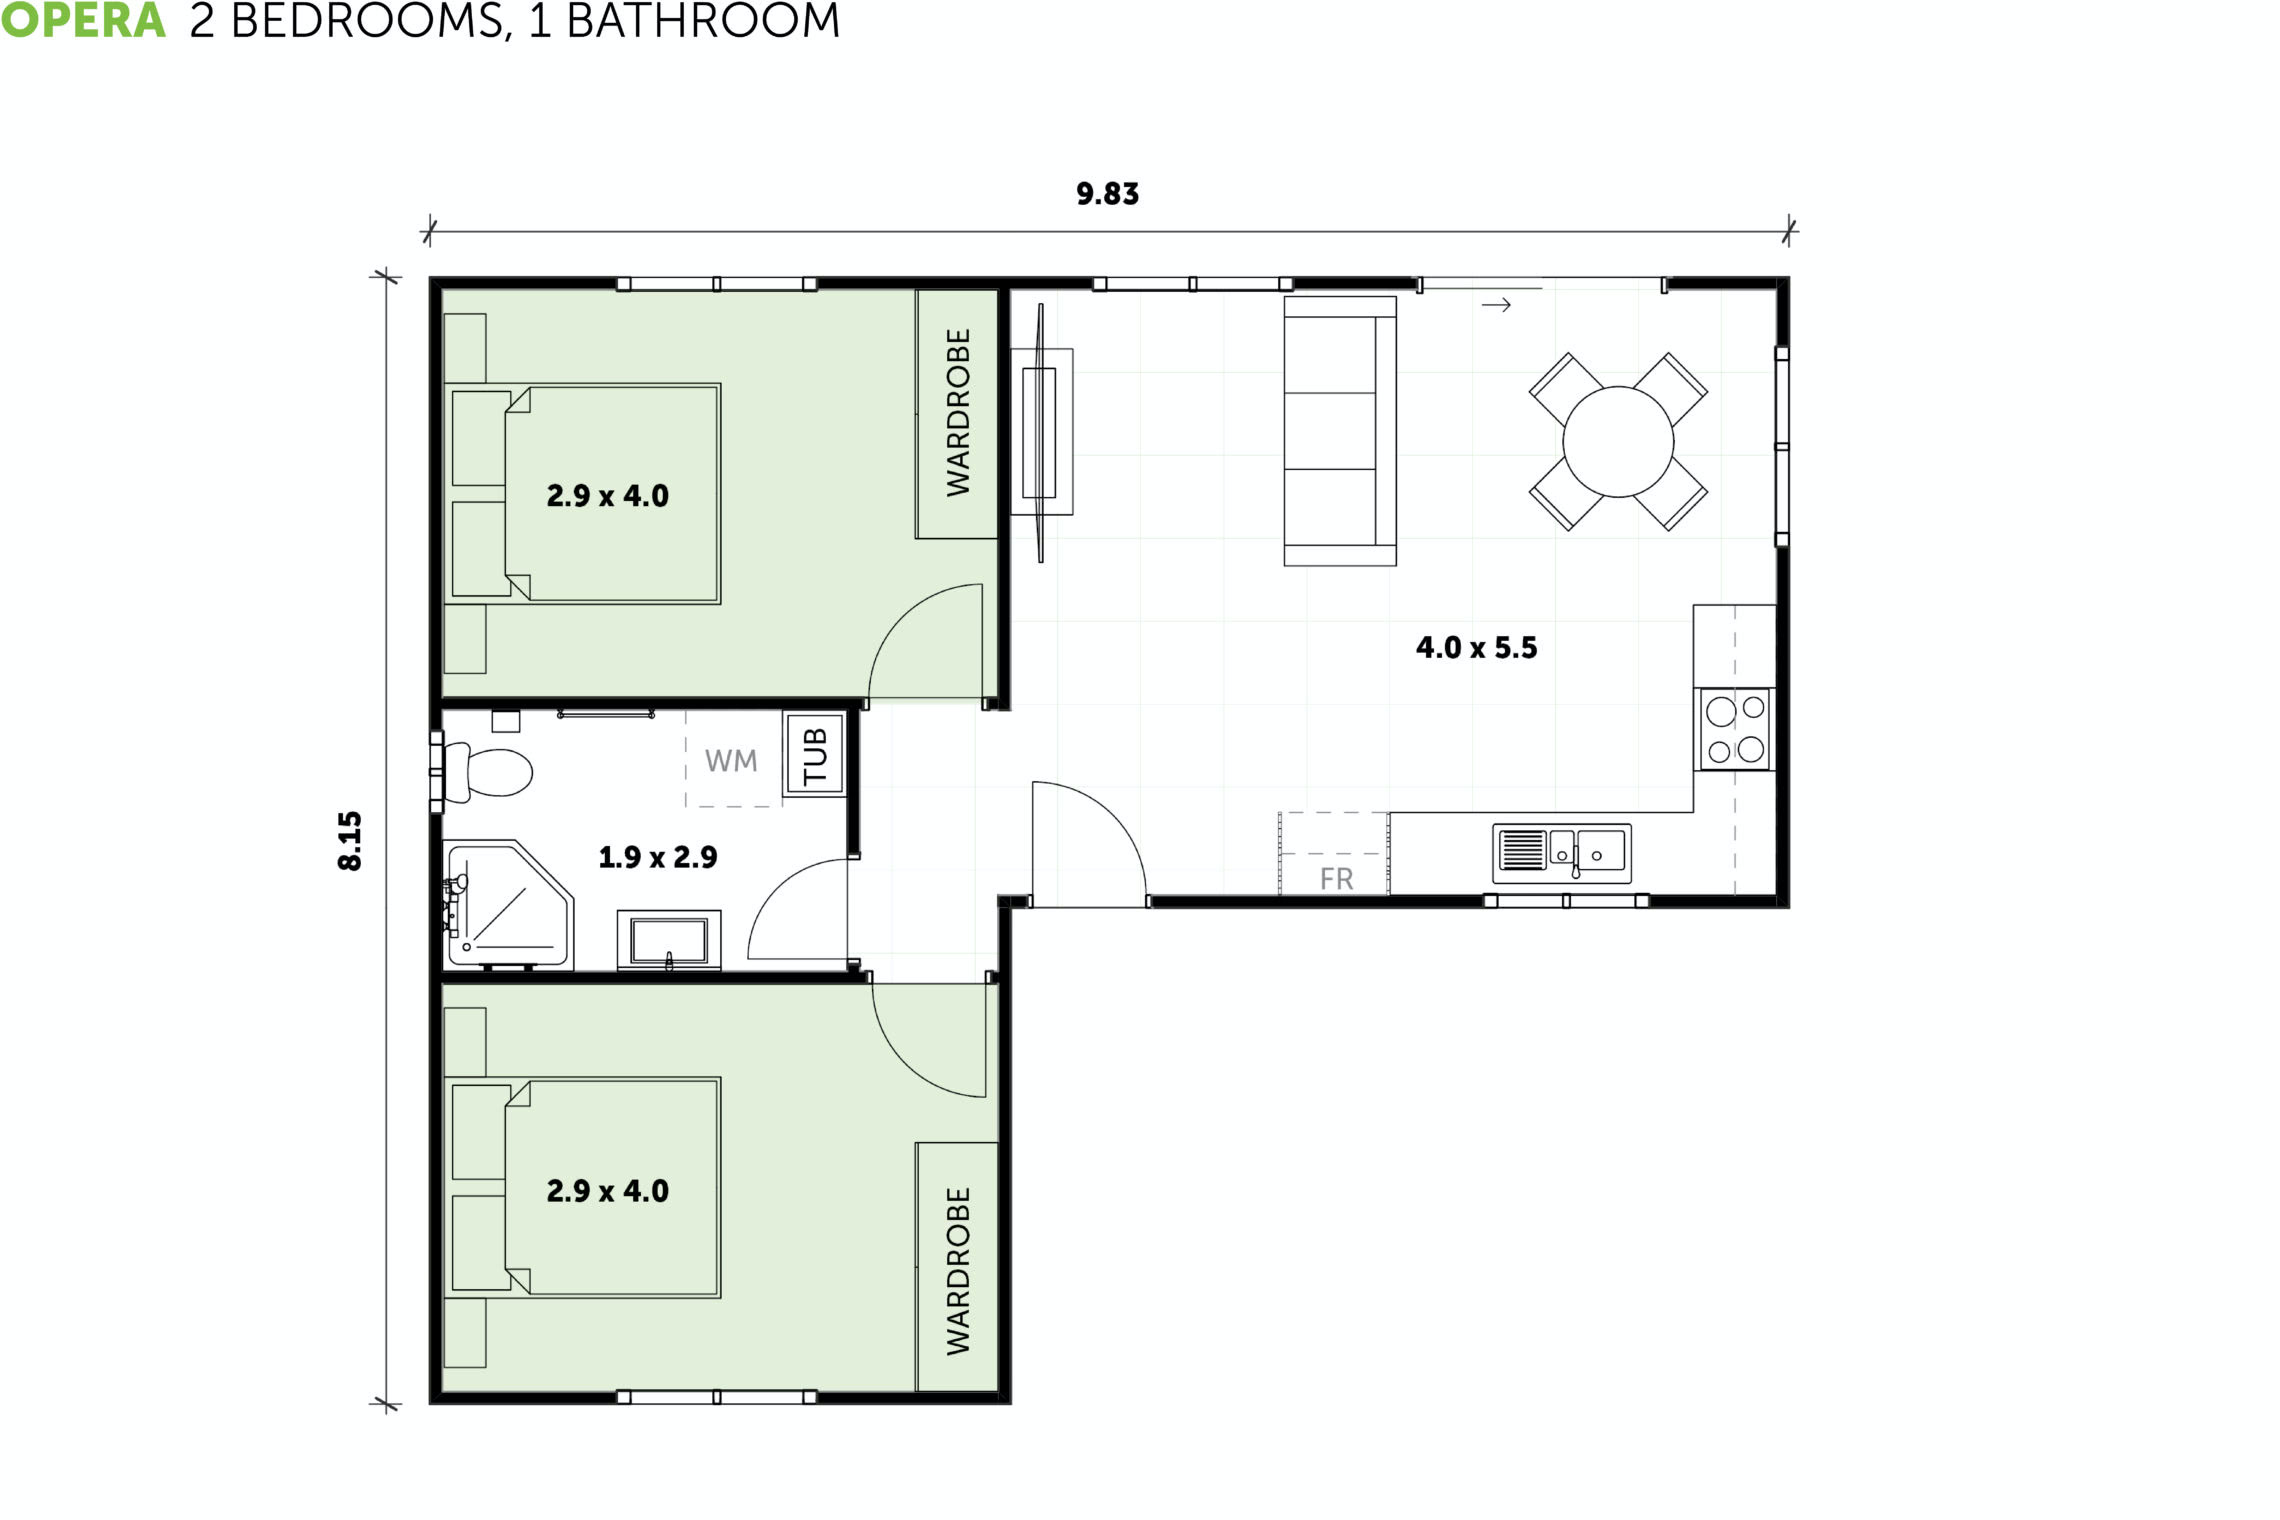 Banksia Granny Flat with 2 Bedrooms